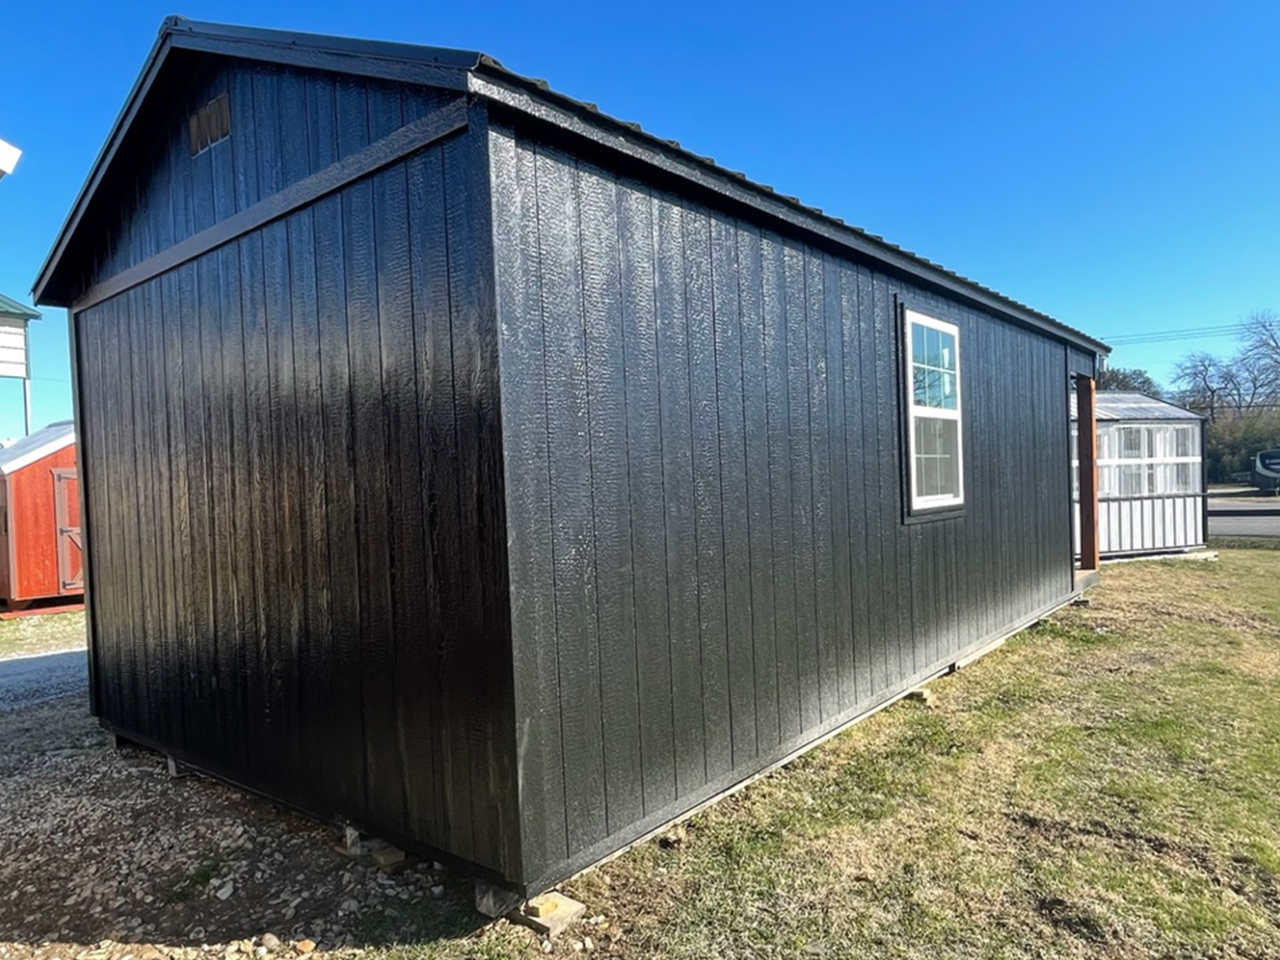 Farm and Yard Central Texas Lelands Painted Sheds Diamond Series Cabinette Shed Tiny Home, Home Office, Home Gym, She Shed, Man Cave, Finished Out Shed